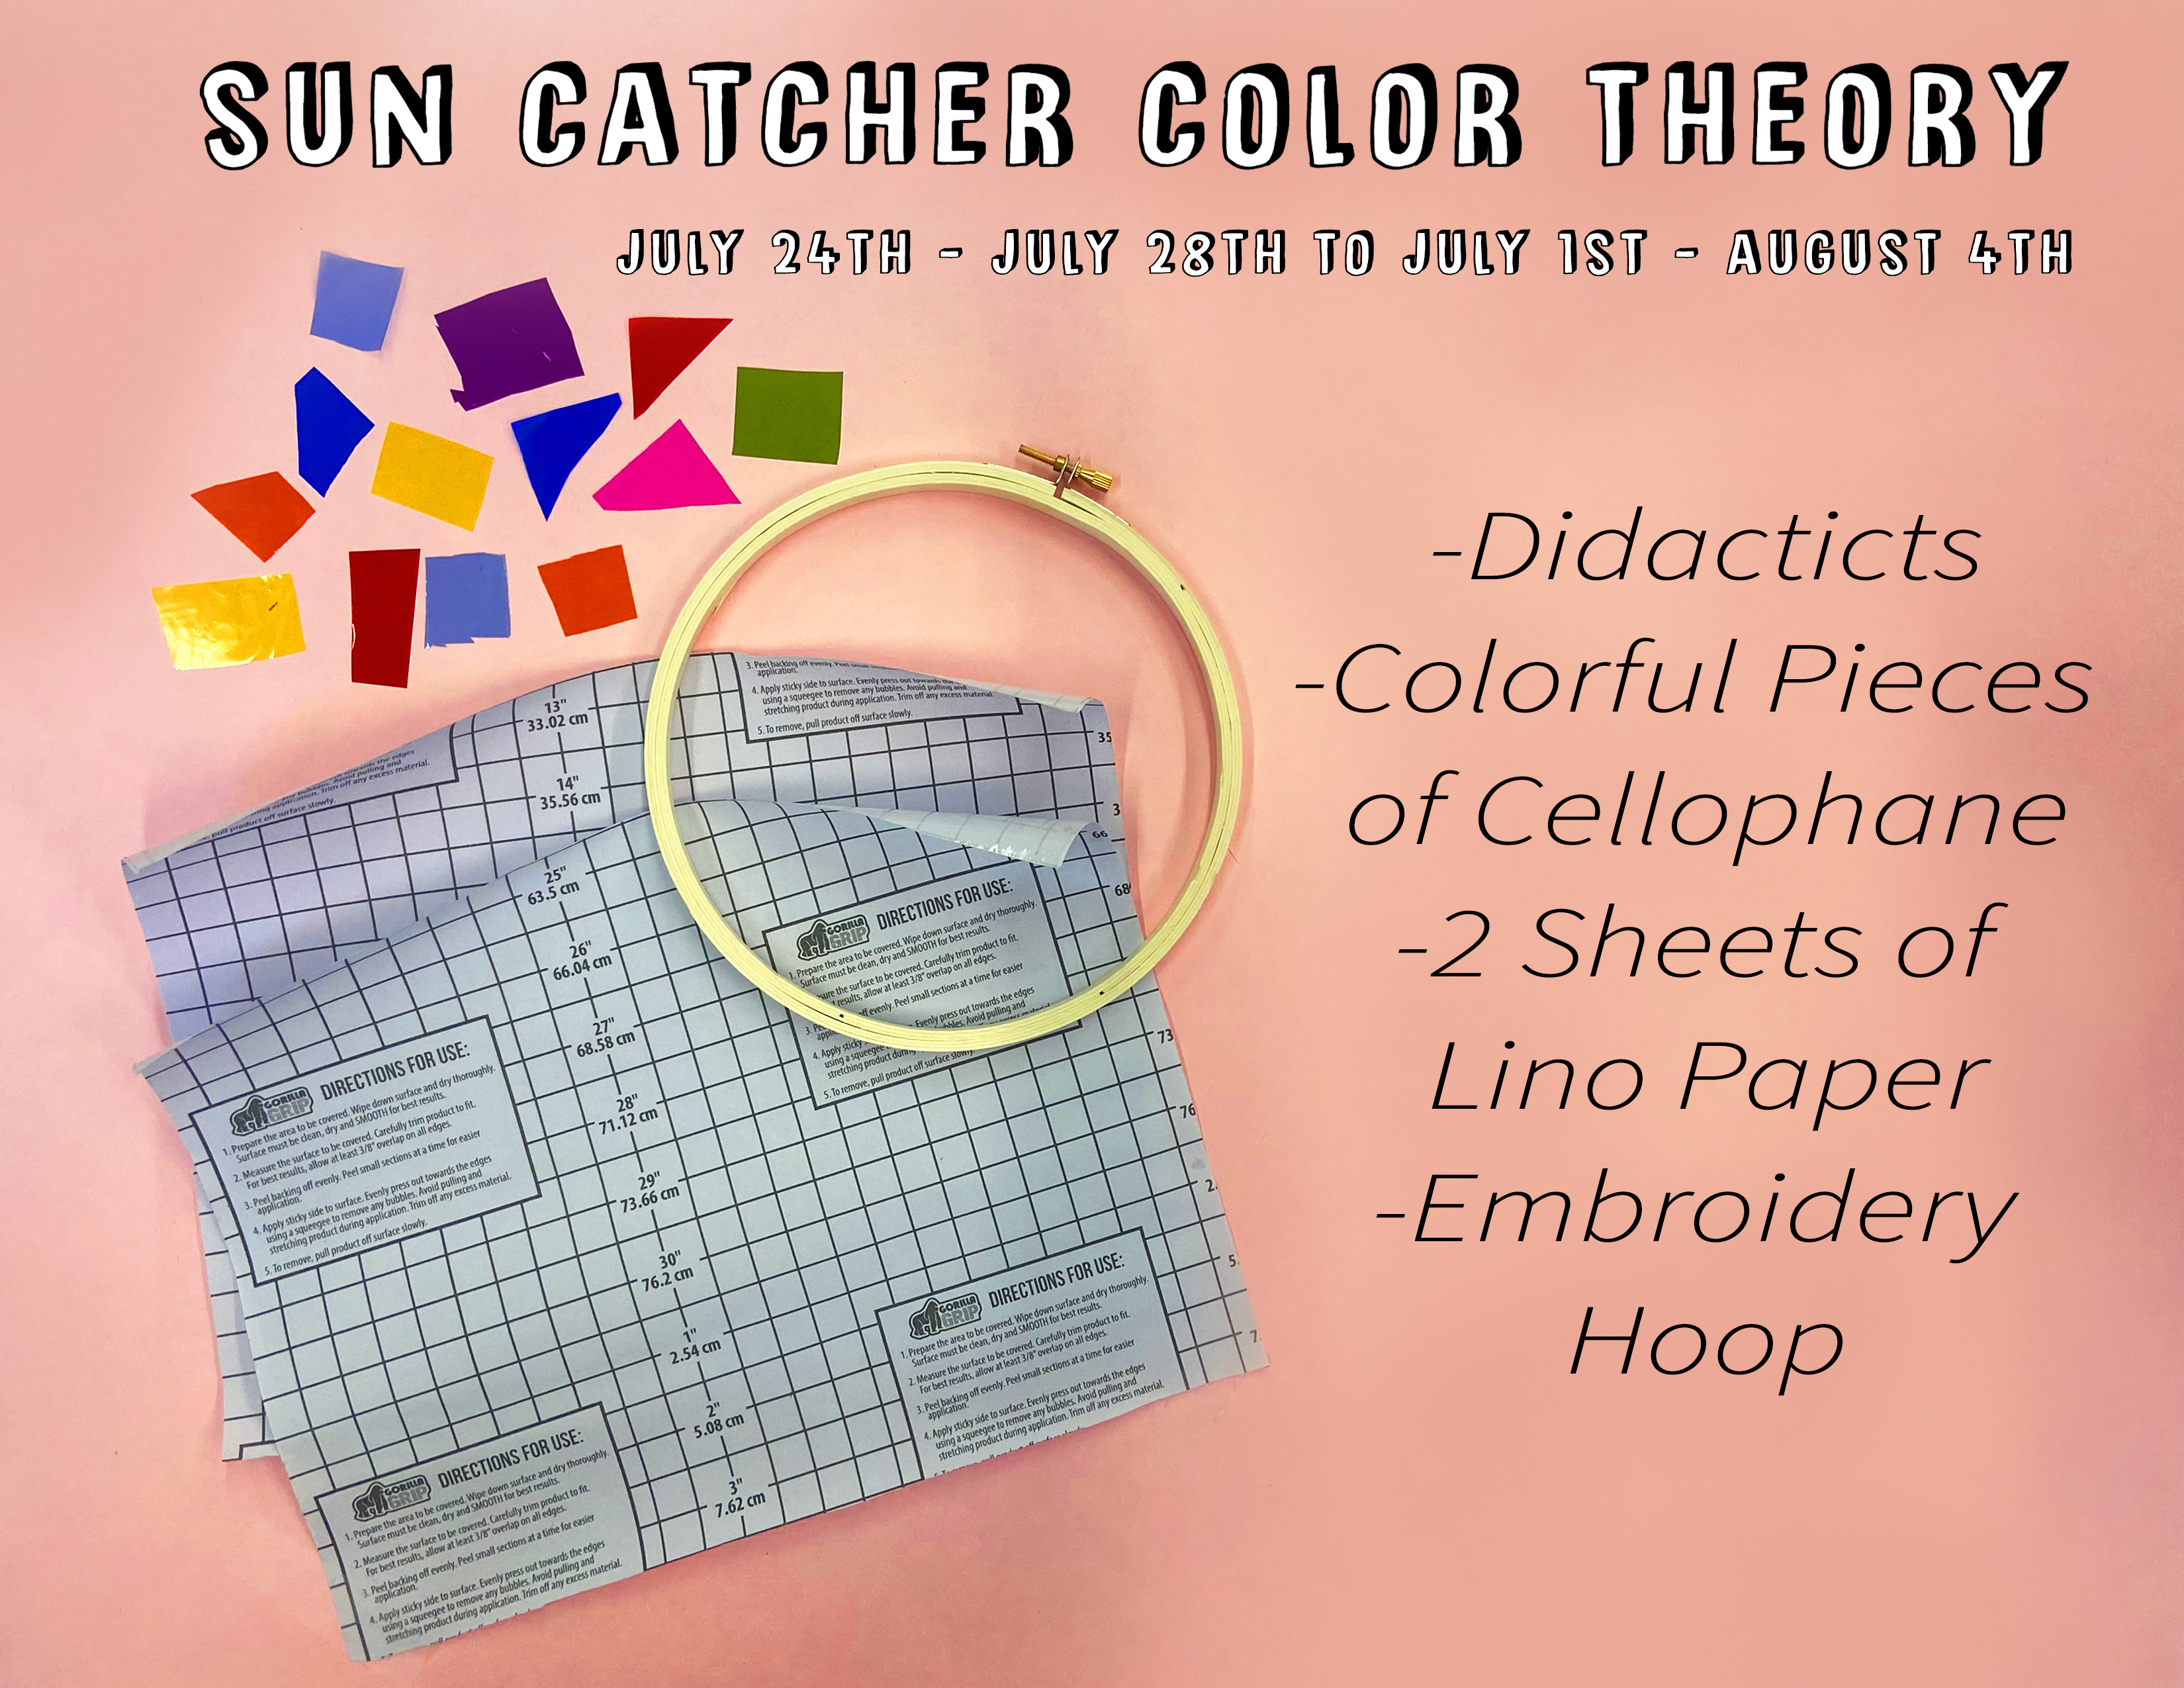 Sun Catcher Color Theory